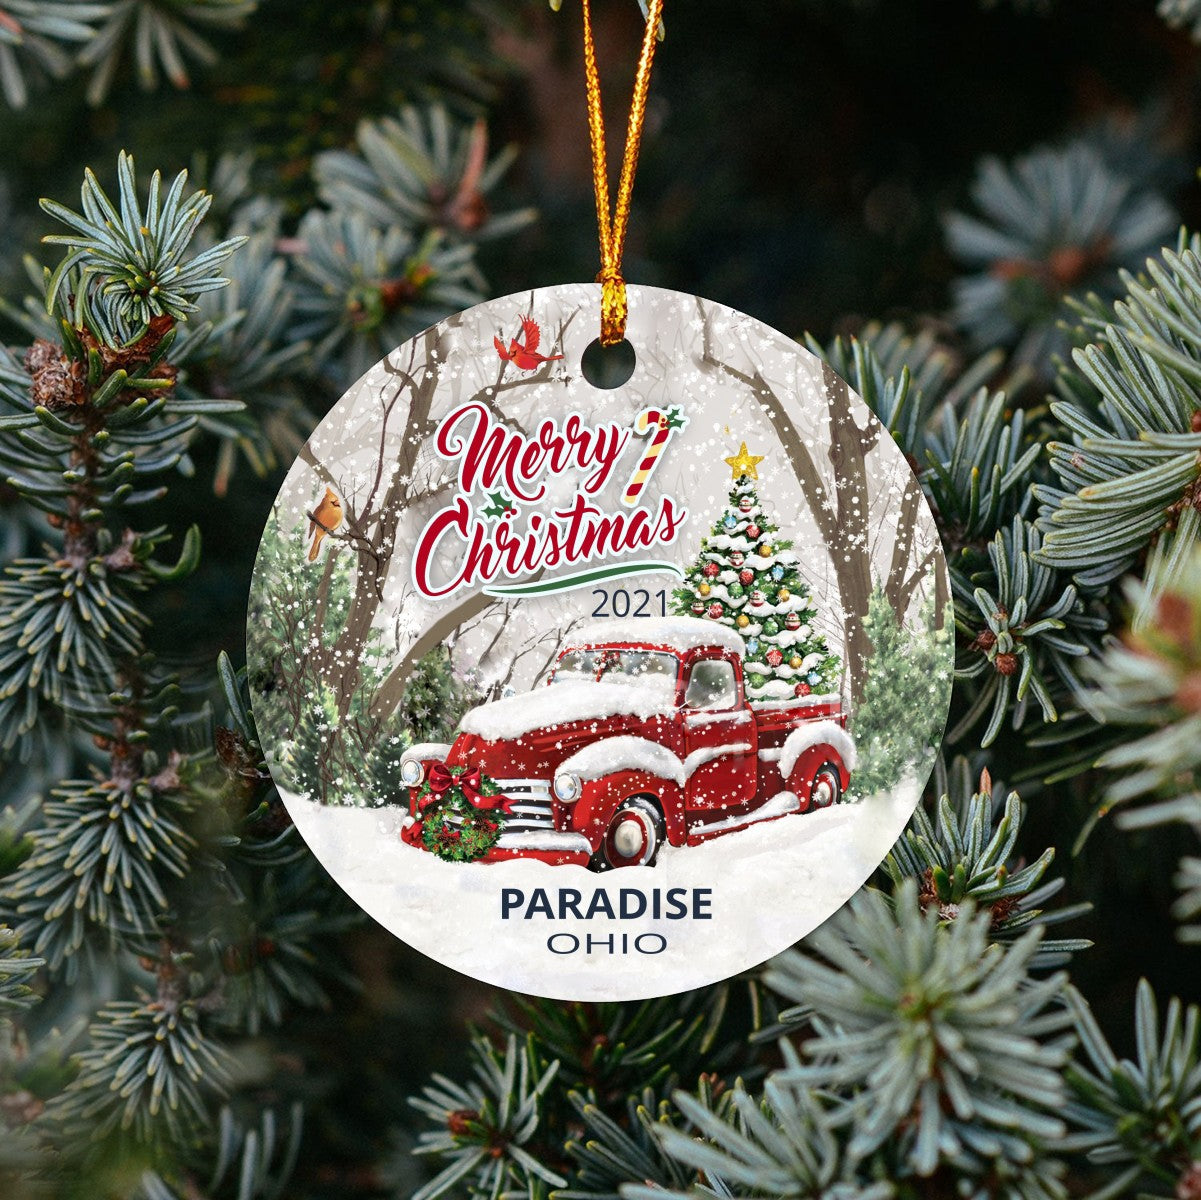 Christmas Tree Ornaments Paradise - Ornament With Name City, State Paradise Ohio OH Ornament - Red Truck Xmas Ornaments 3'' Plastic Gift For Family, Friend And Housewarming